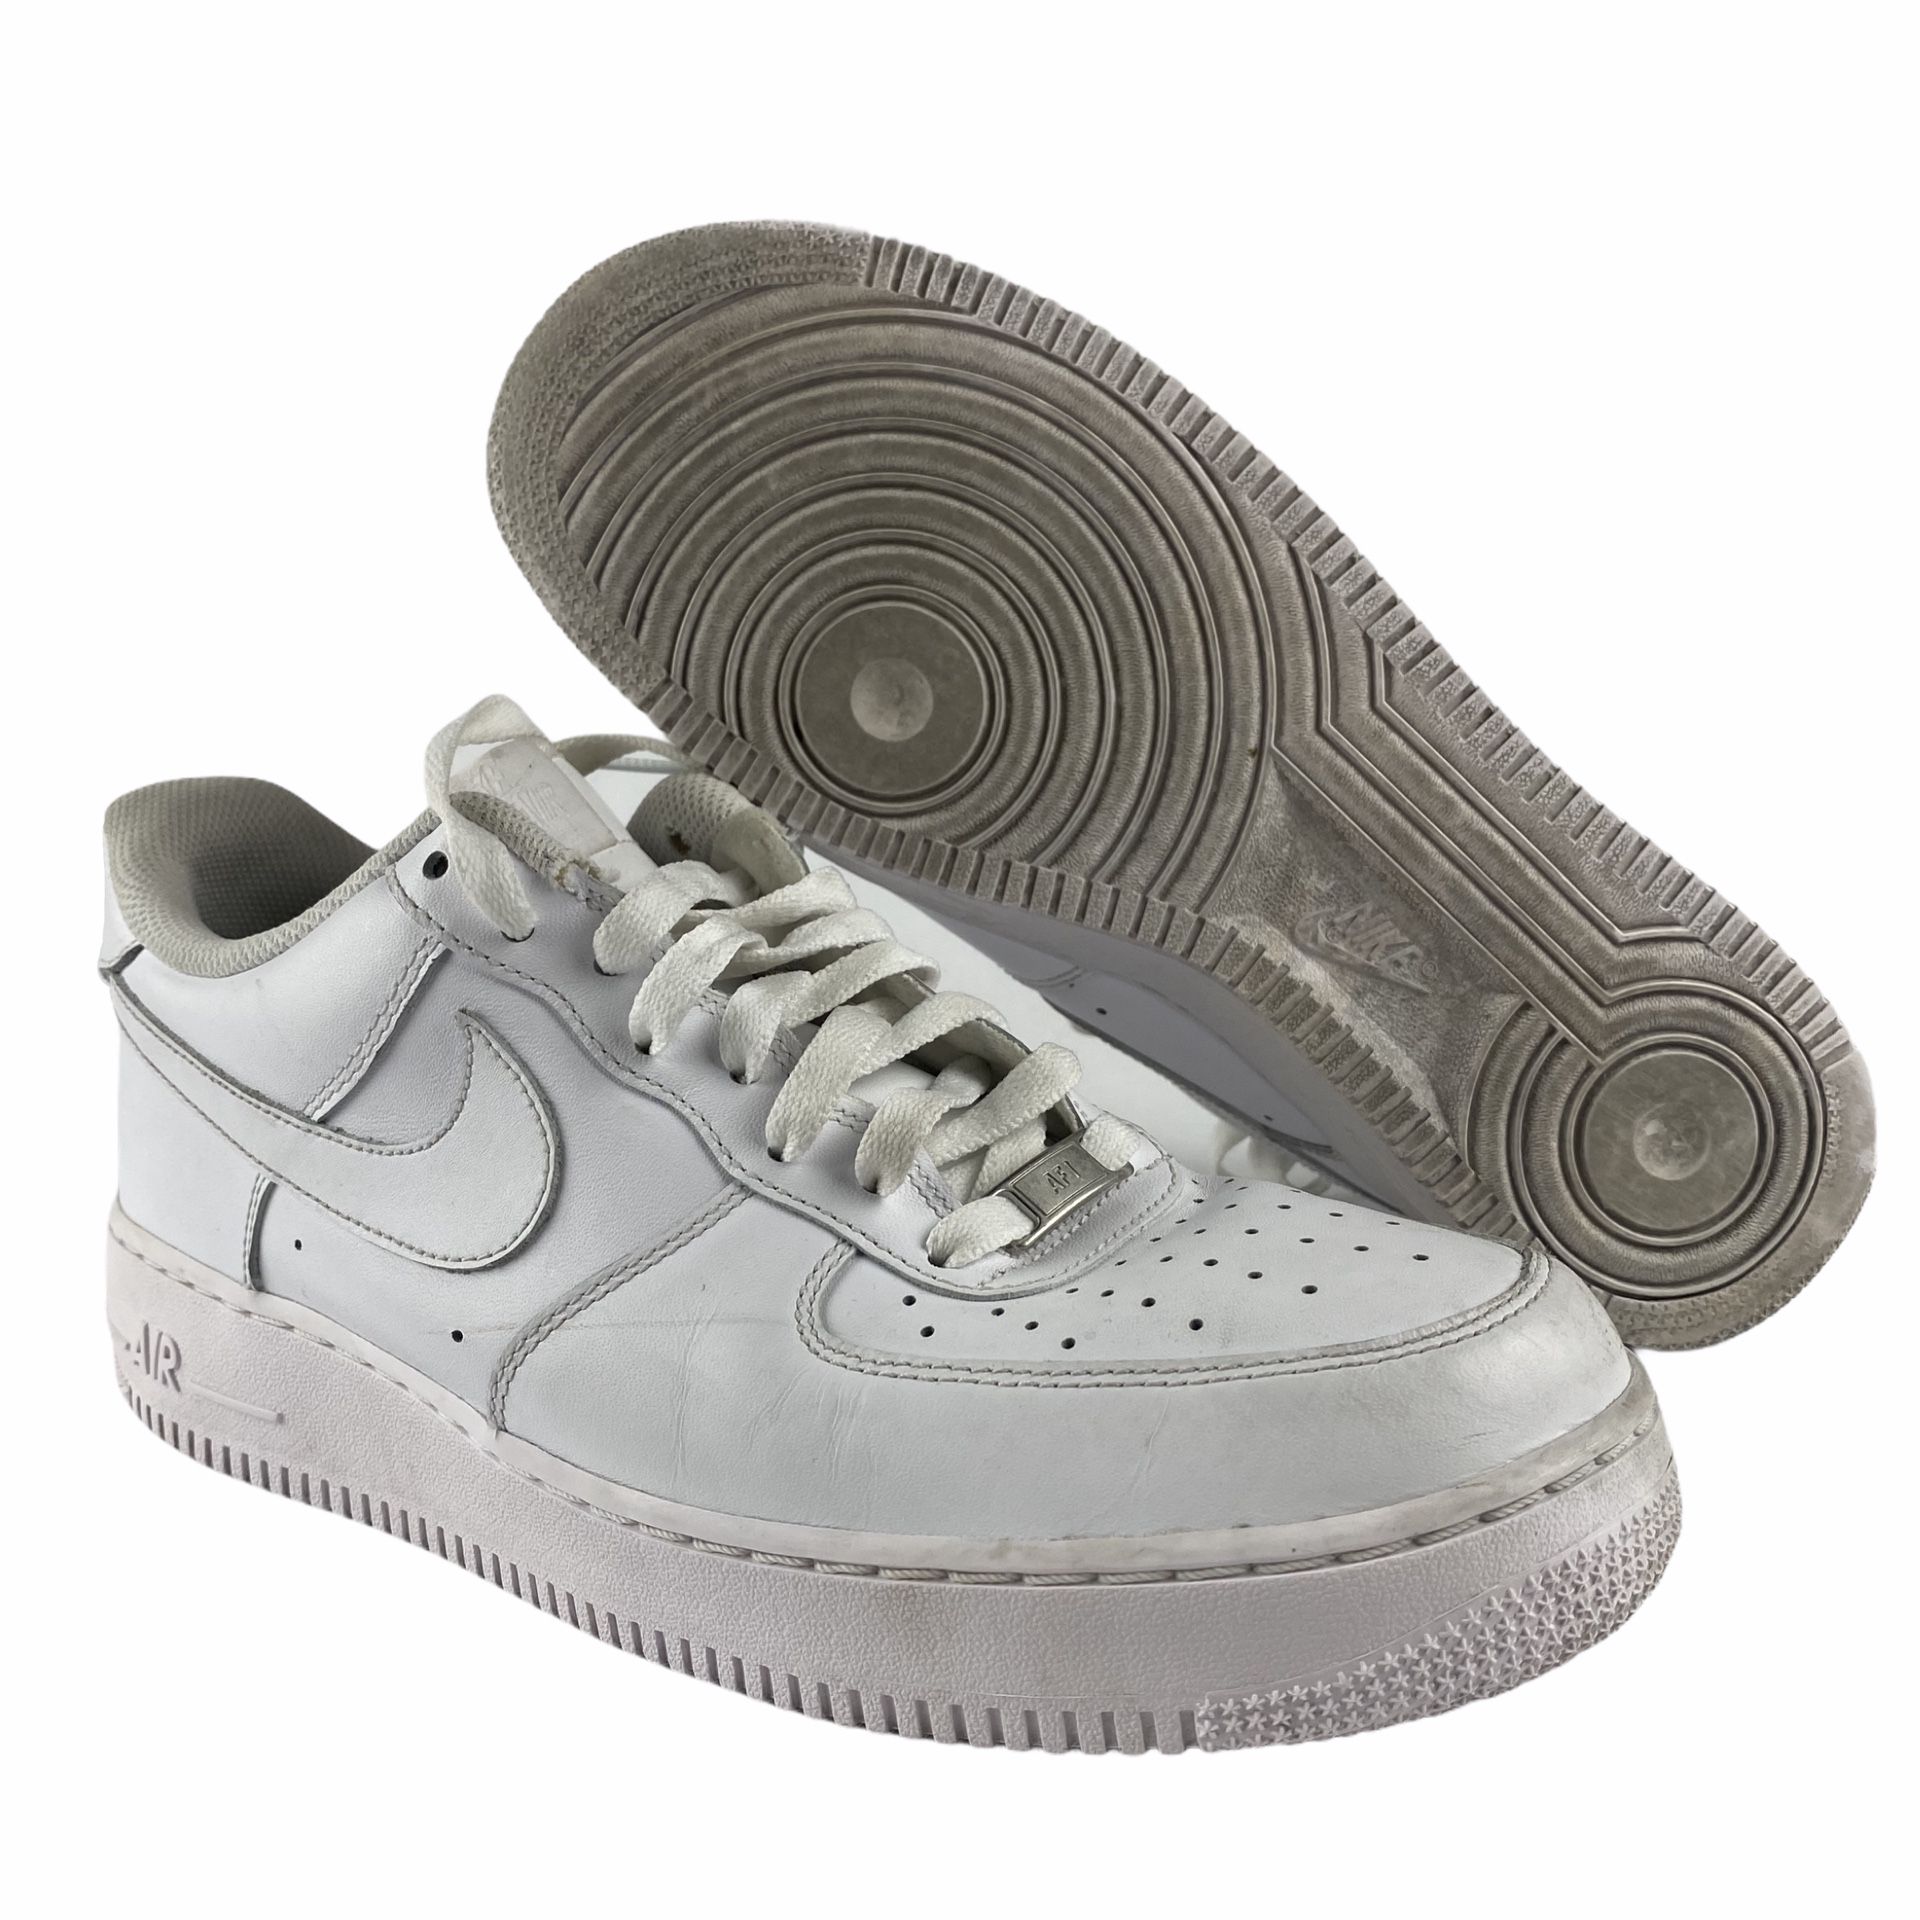 Nike Air Force 1 '07 Mens White Leather Sneakers Shoes 315122-111 Size 10.5